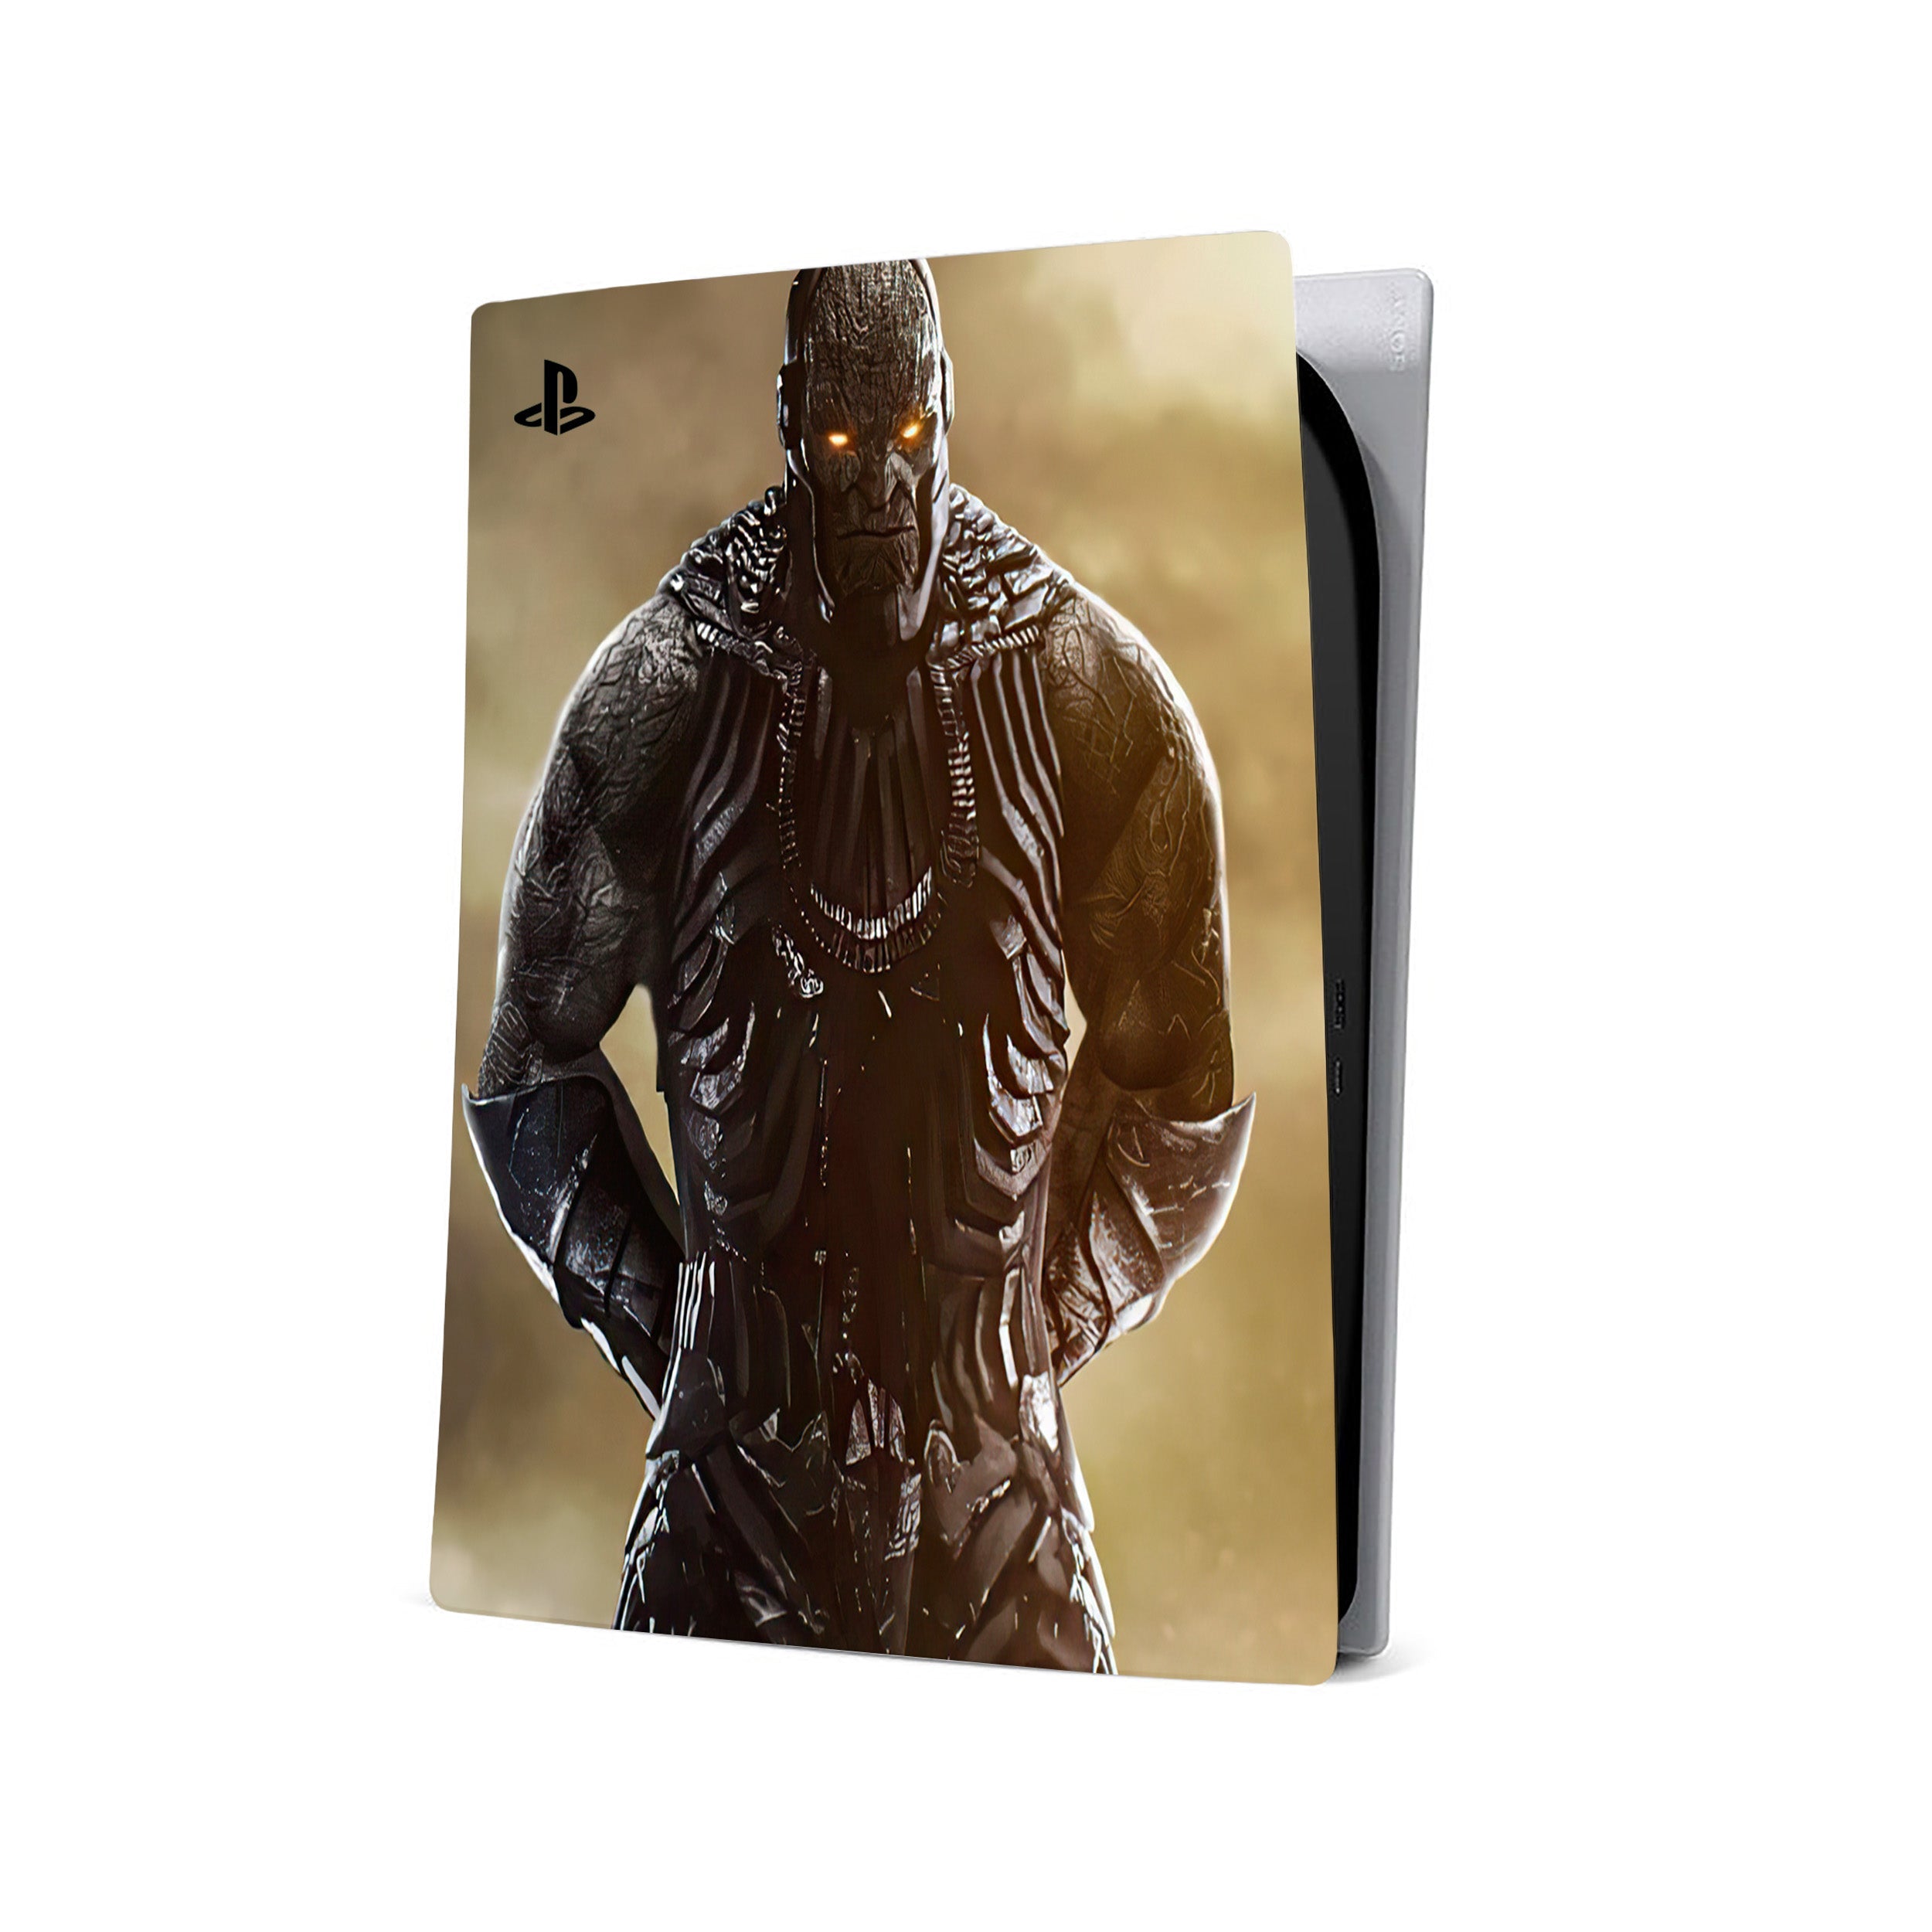 A video game skin featuring a DC Comics Darkseid design for the PS5.